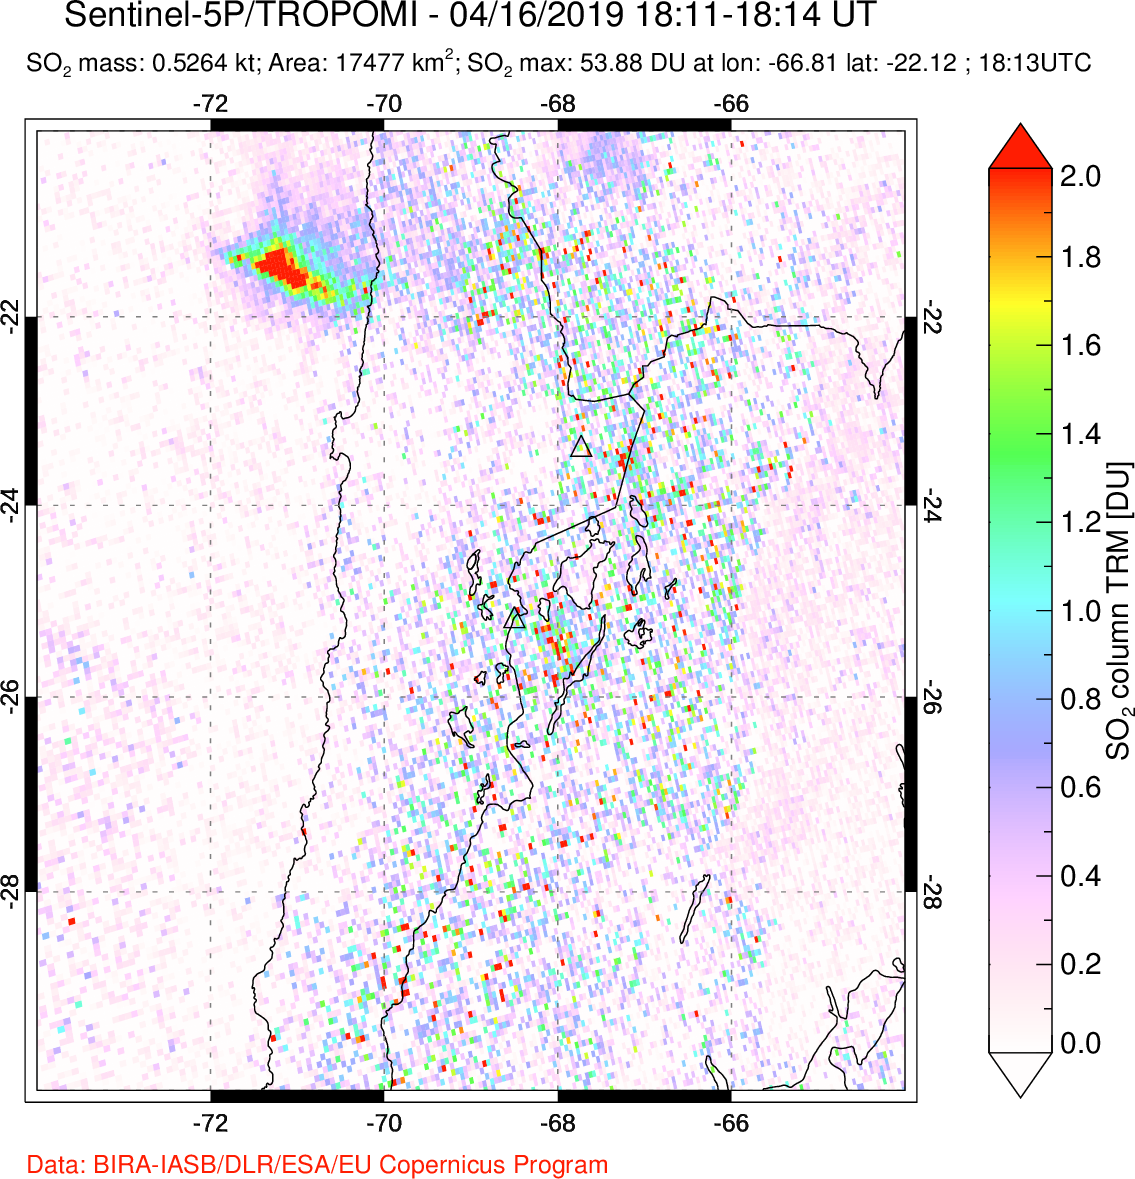 A sulfur dioxide image over Northern Chile on Apr 16, 2019.